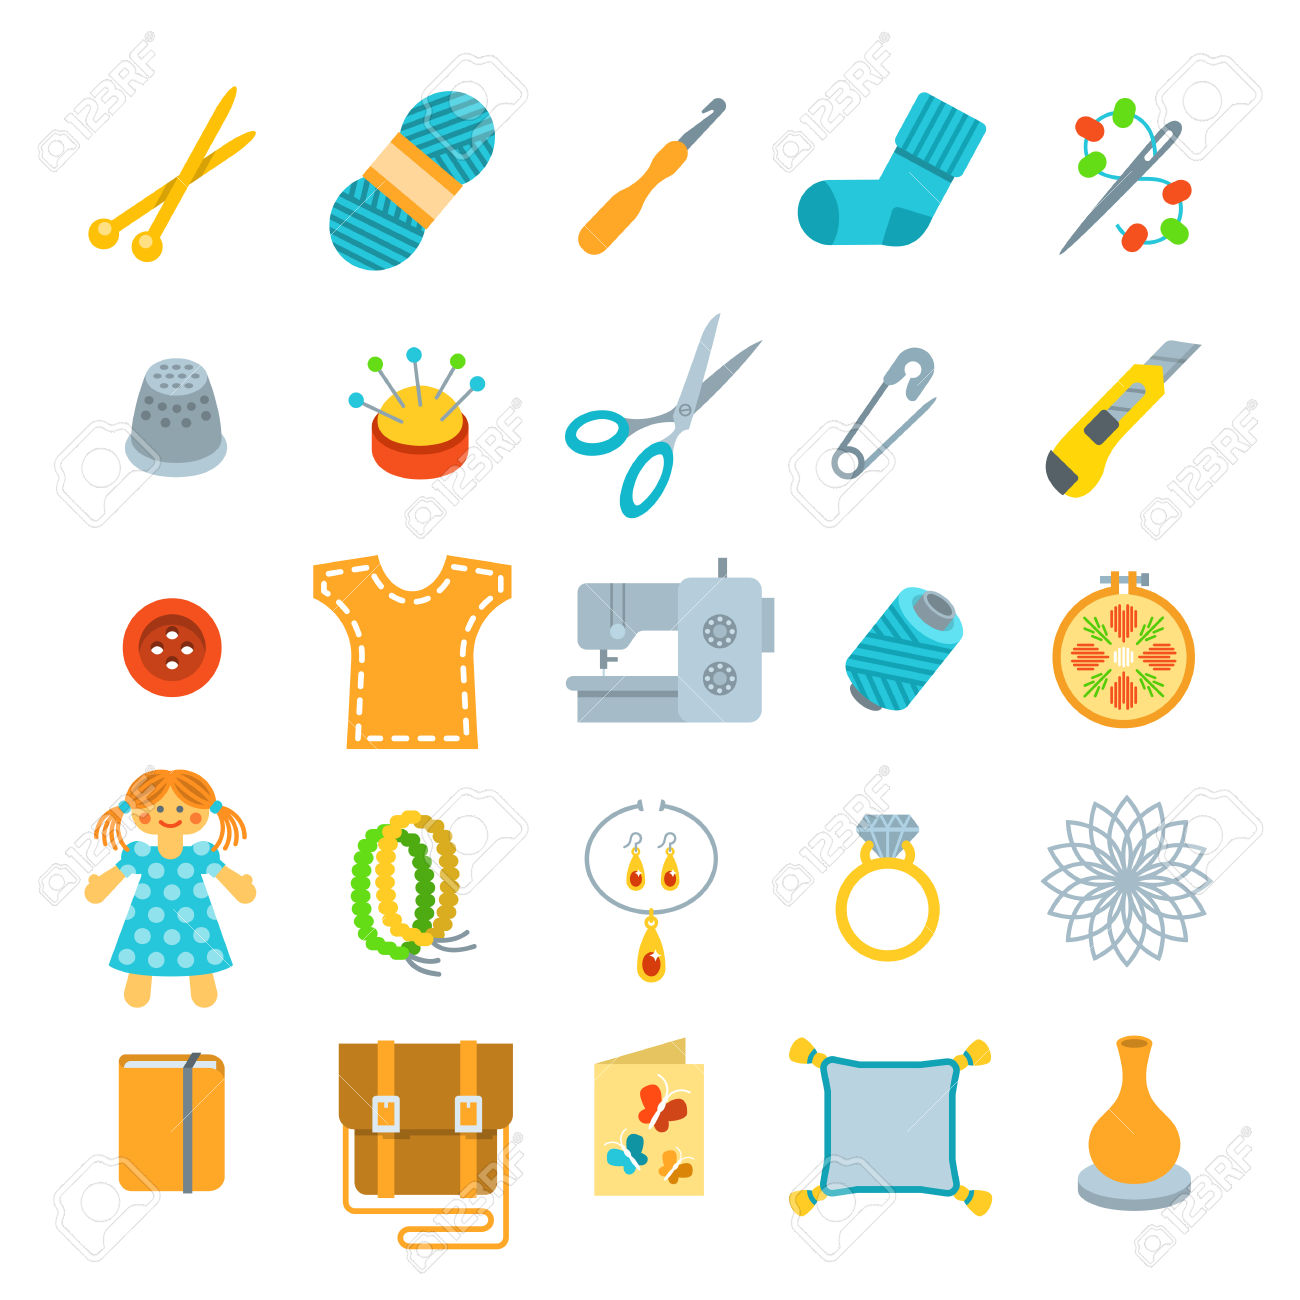 13,231 Handicrafts Stock Vector Illustration And Royalty Free.